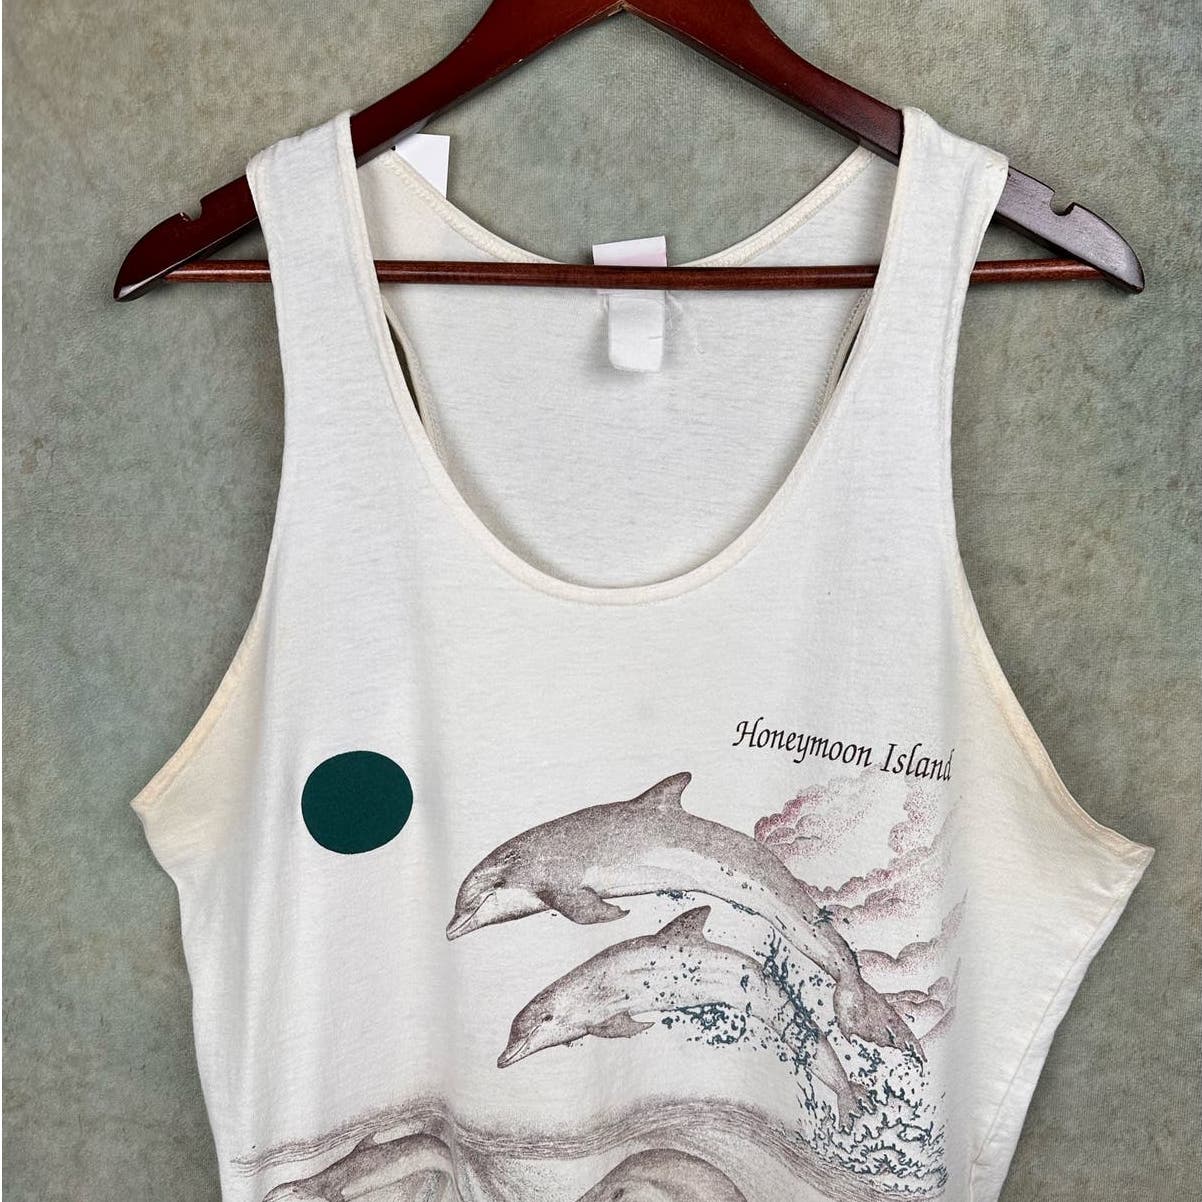 Vintage 90s Dolphin Graphic Tank Top M